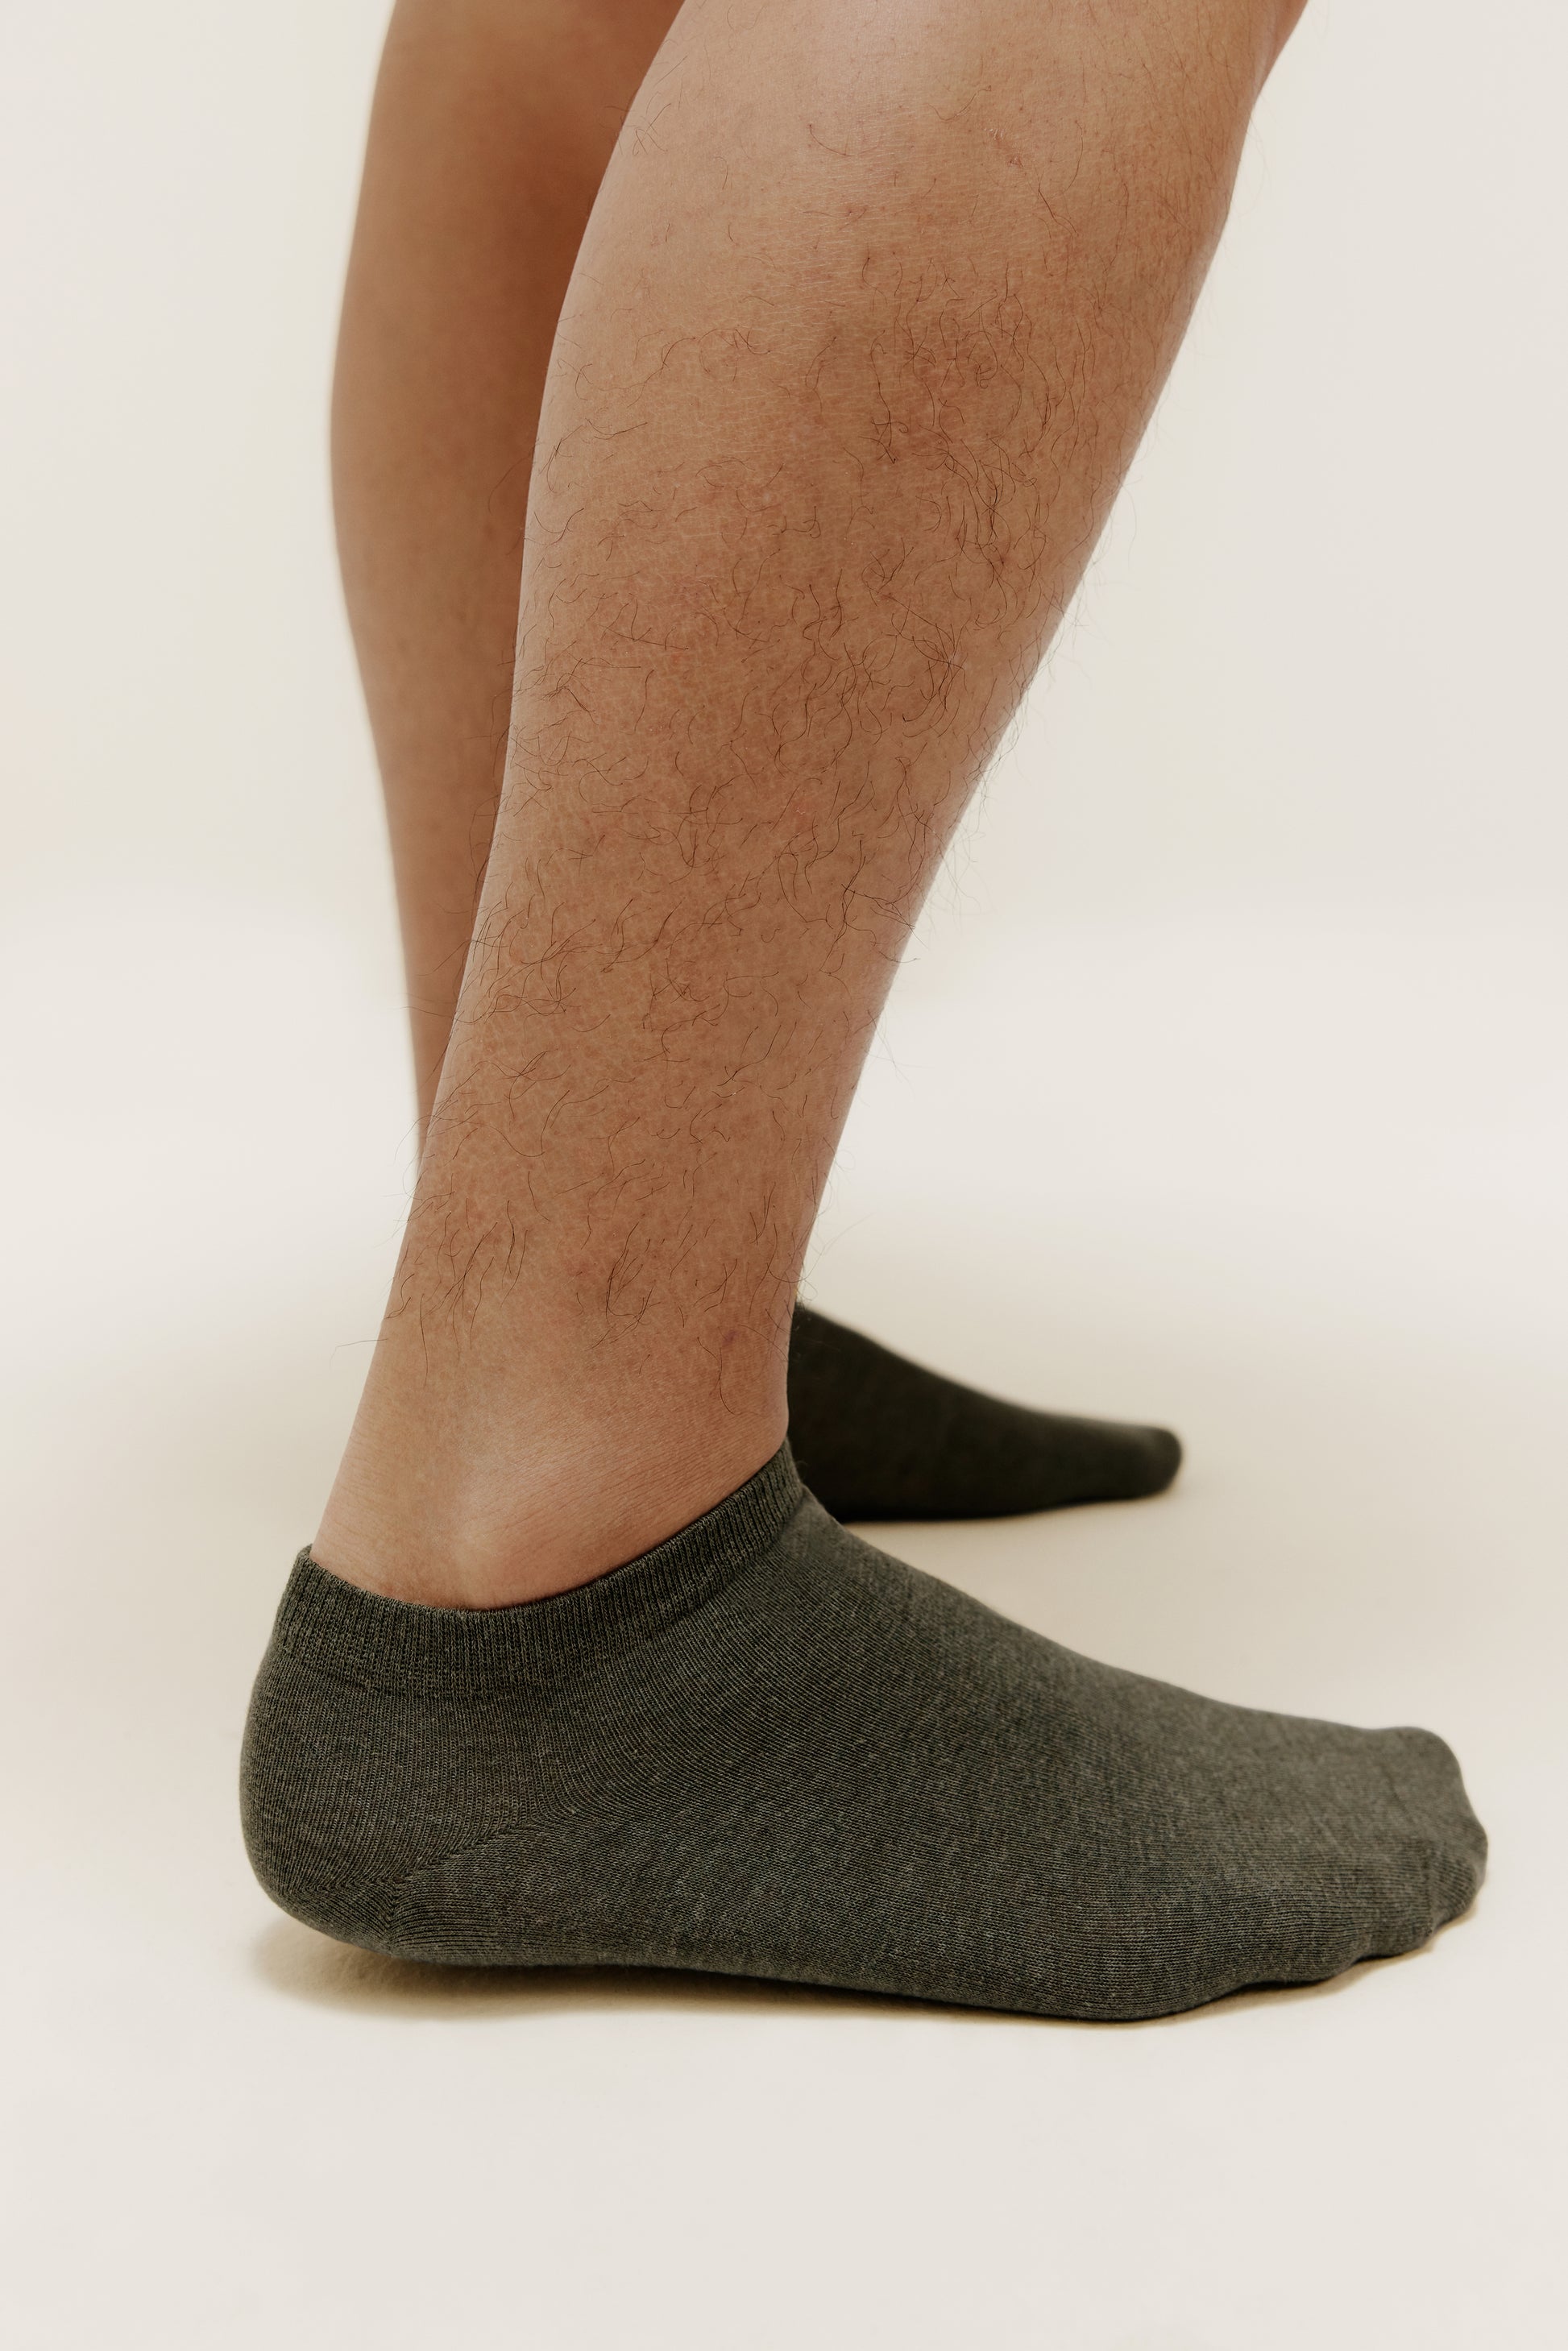 side view of a person wearing dark green ankle socks